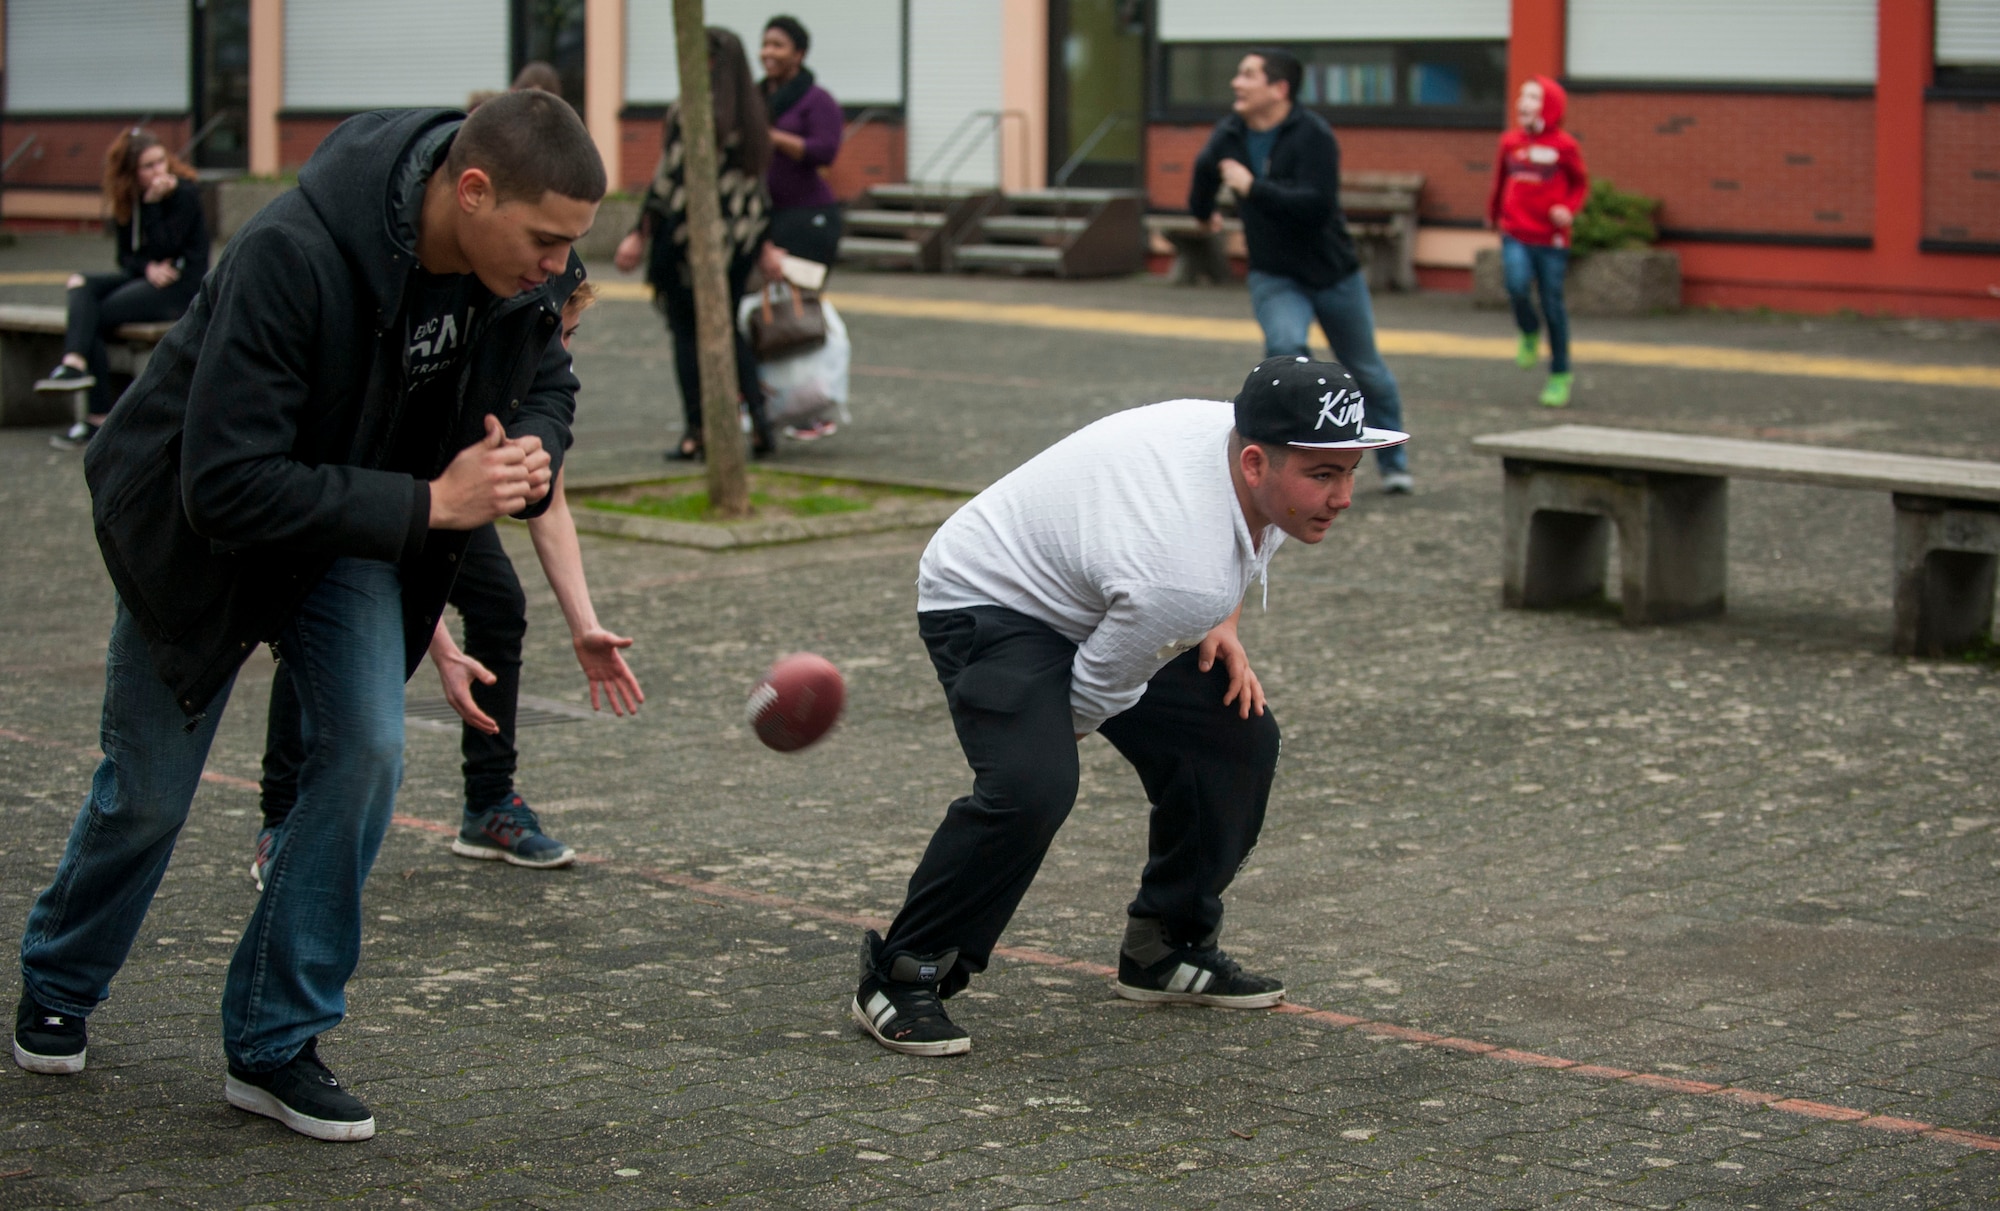 Dogan, a St. Vinzenzhaus resident, right, hikes a football after a holiday party at the institution of child and youth services in Speicher, Germany, Dec. 13, 2015. Residents of St. Vinzenzhaus picked out their favorite presents from a stockpile and played with them afterwards. (U.S. Air Force photo by Airman 1st Class Timothy Kim/Released)